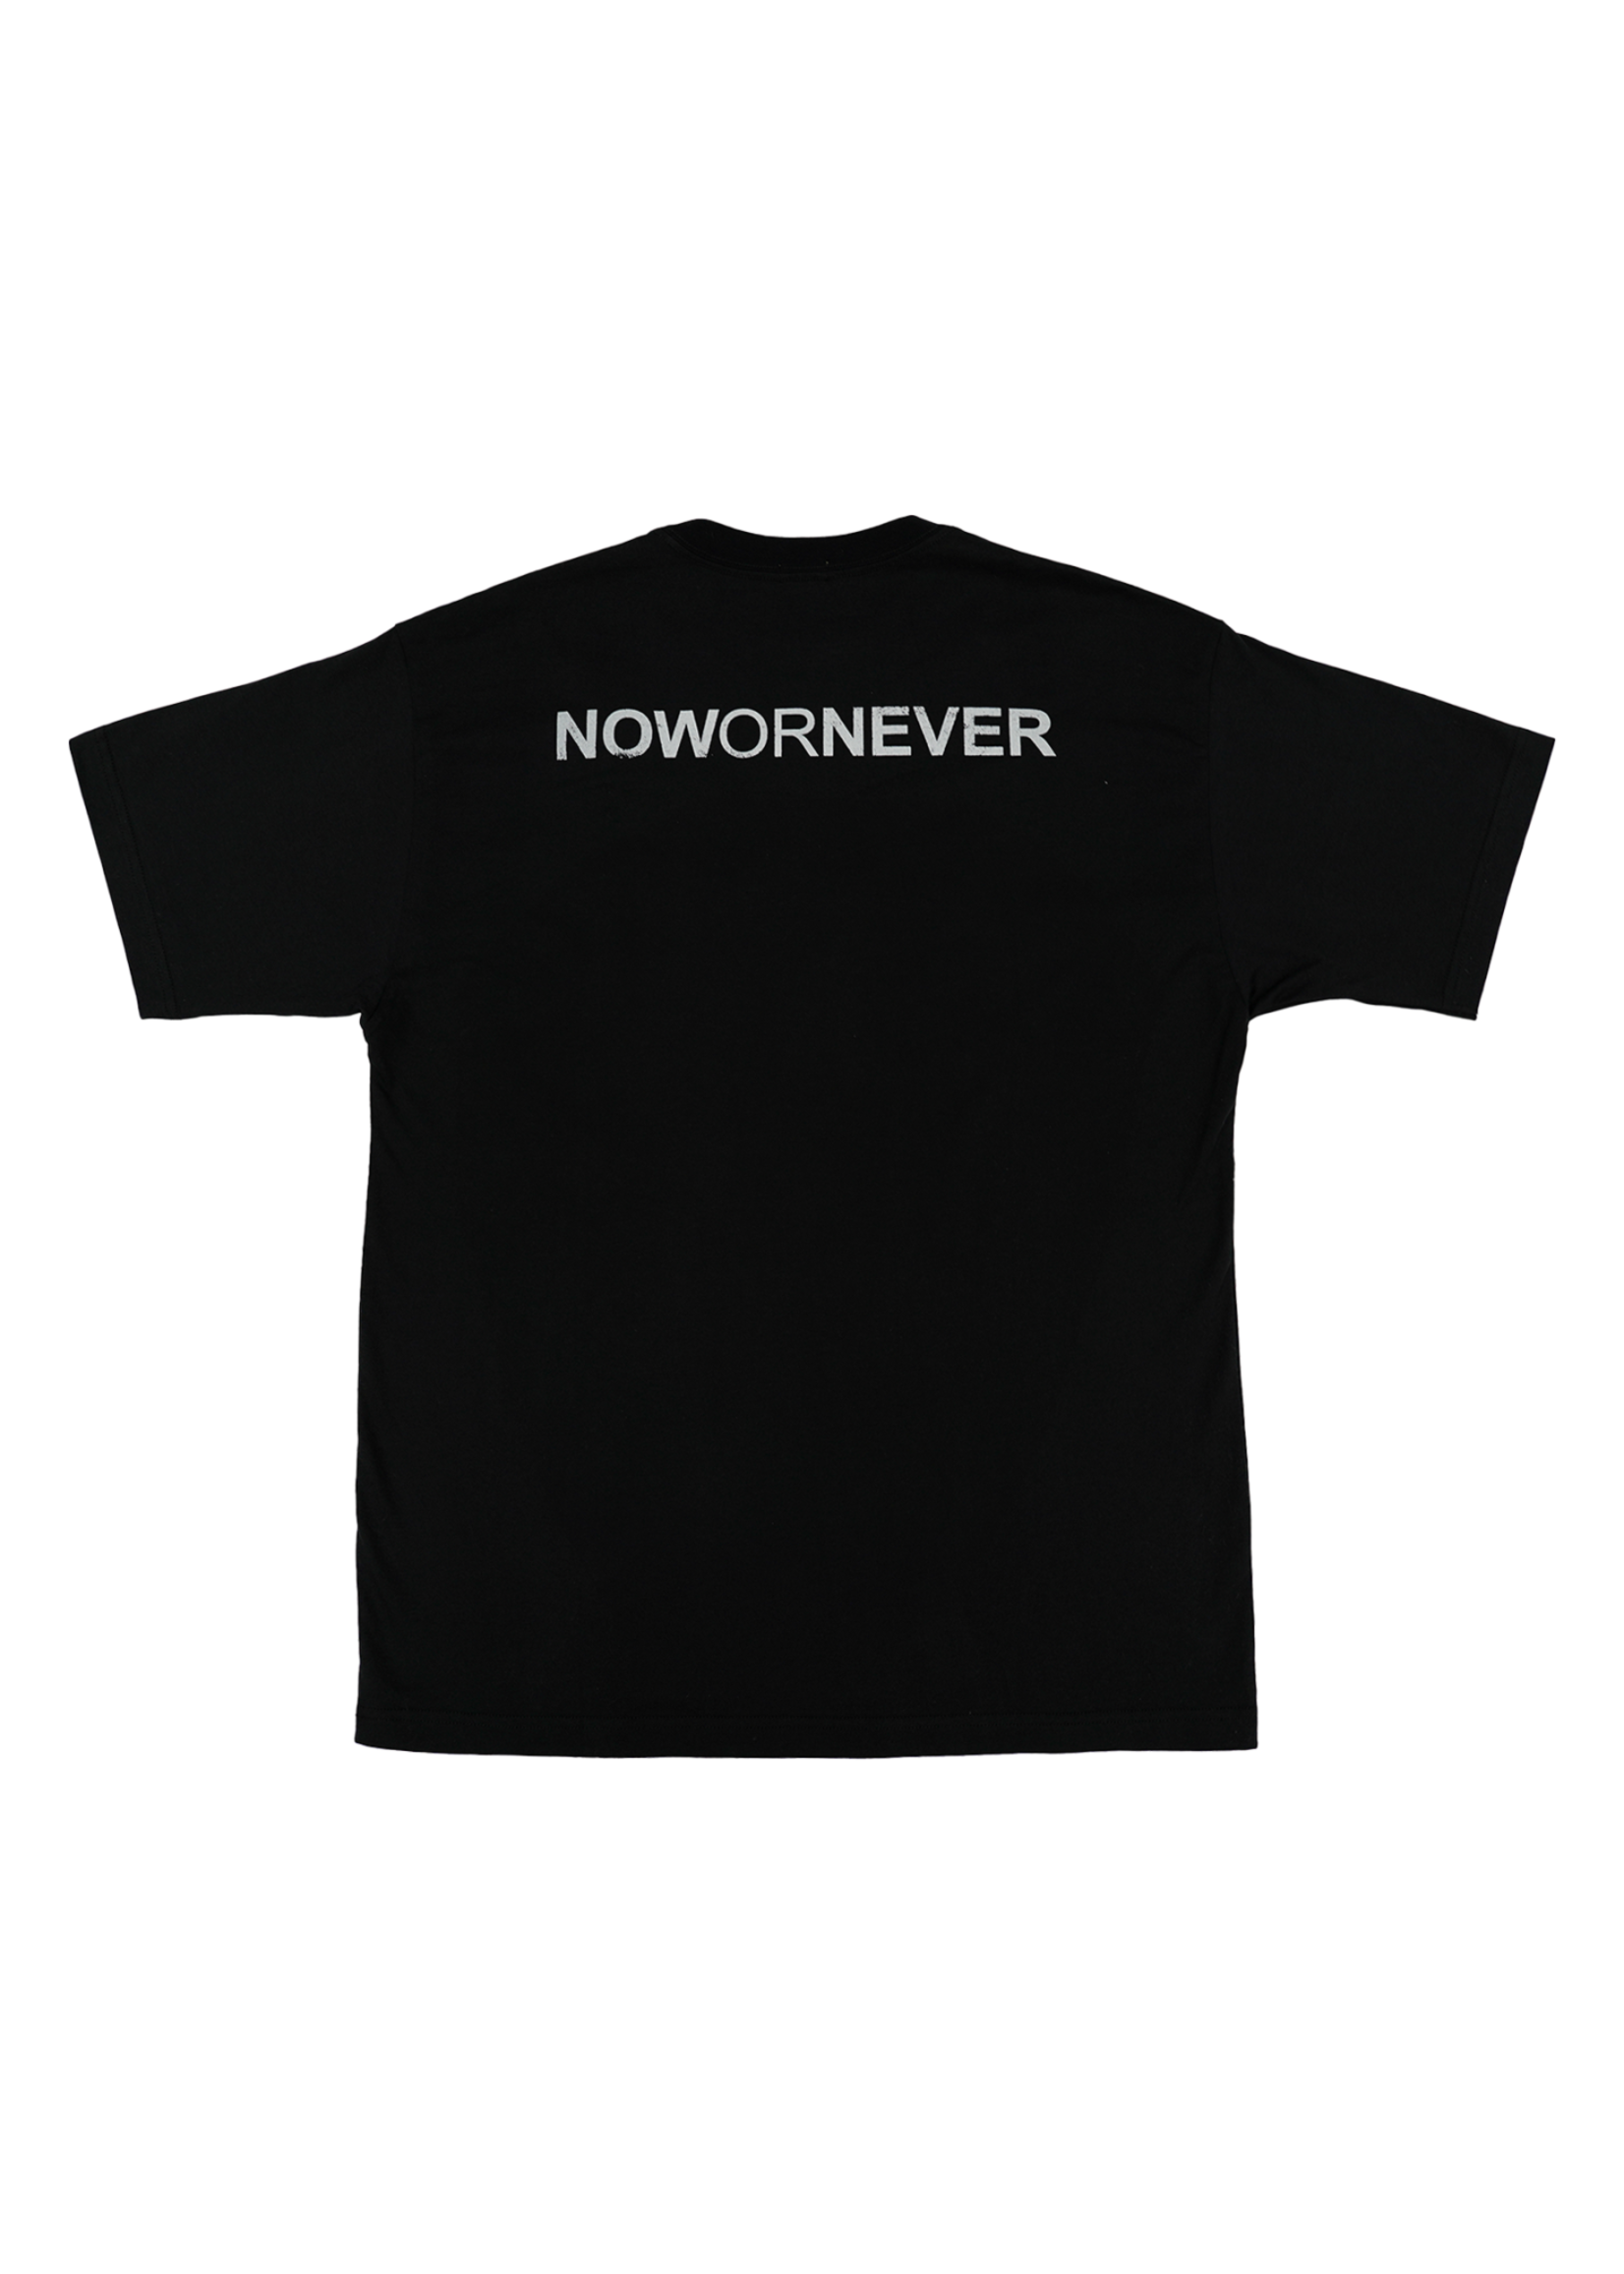 /NOW or NEVER Pretty Hate T-shirt in Black